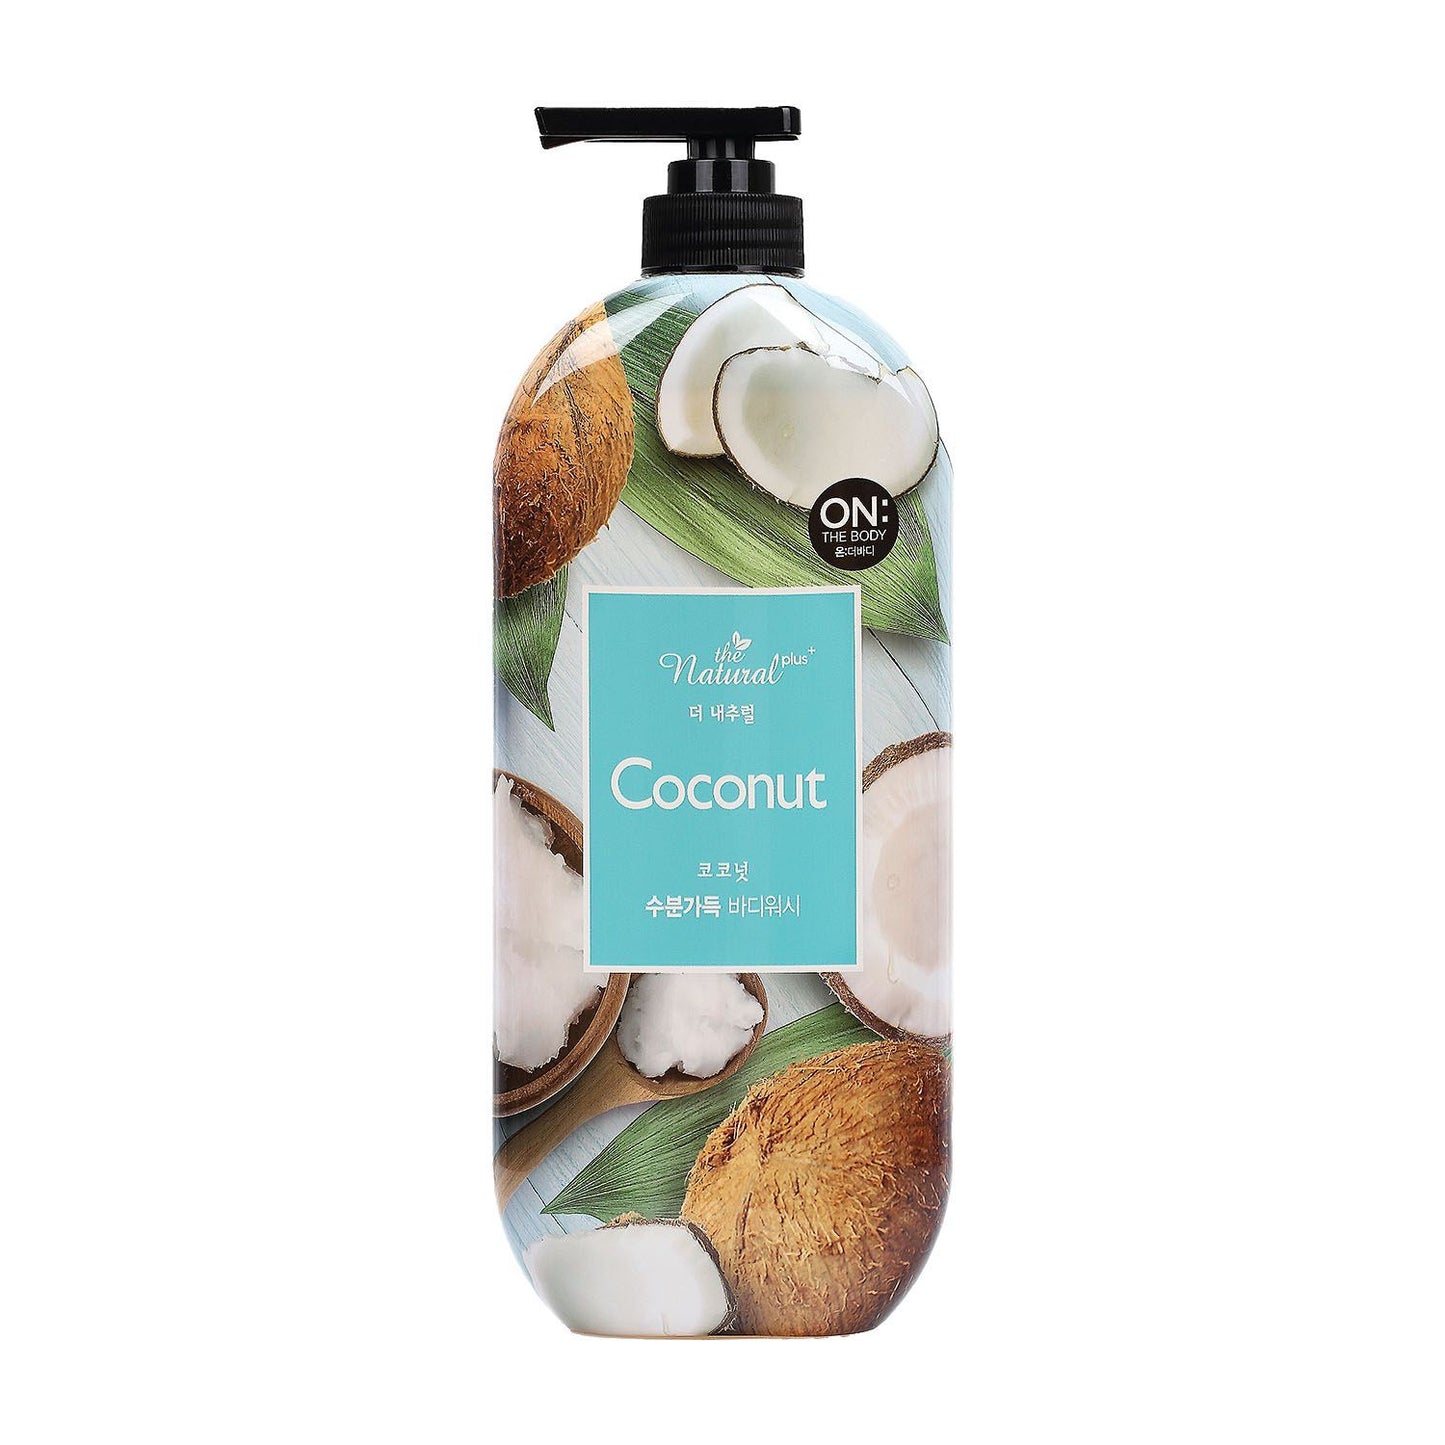 On: The Body The Natural Body Wash